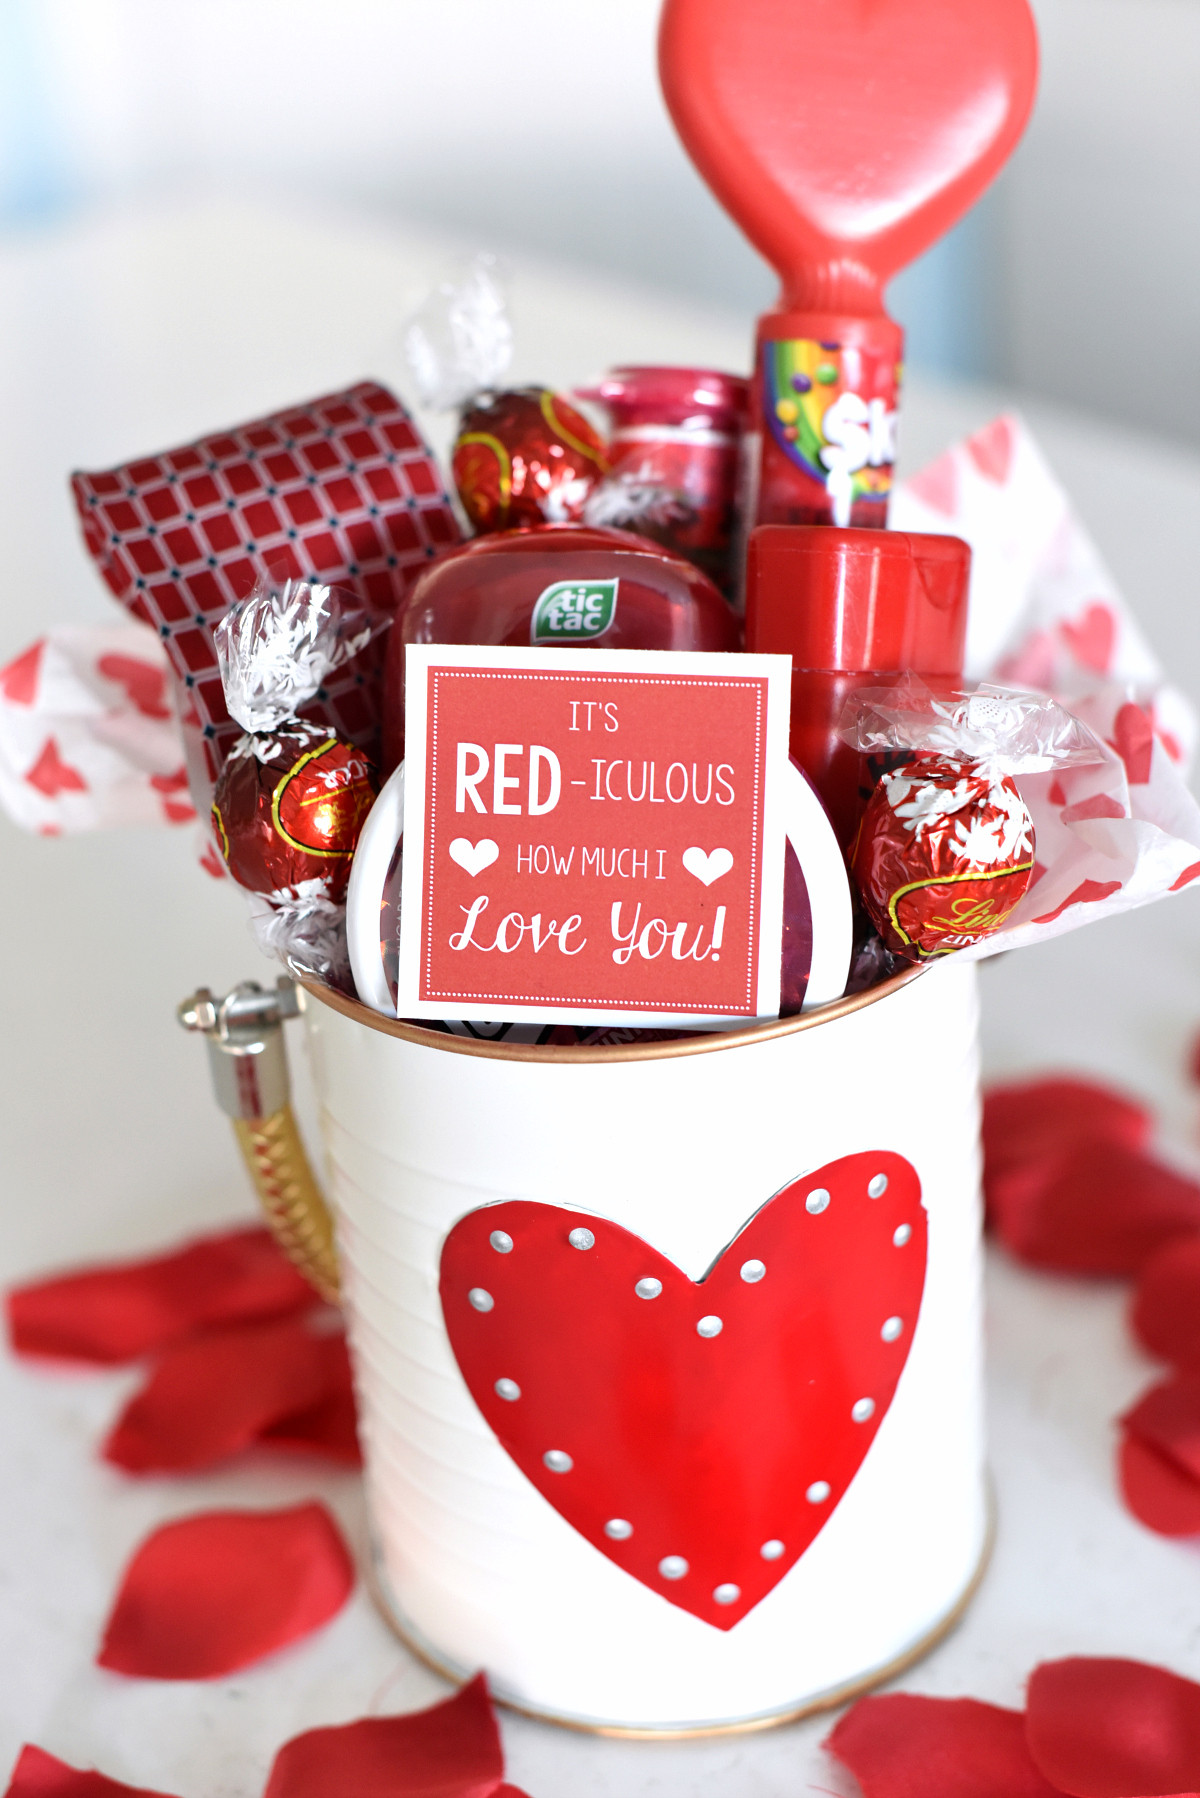 Valentines Day Gift Idea
 Cute Valentine s Day Gift Idea RED iculous Basket